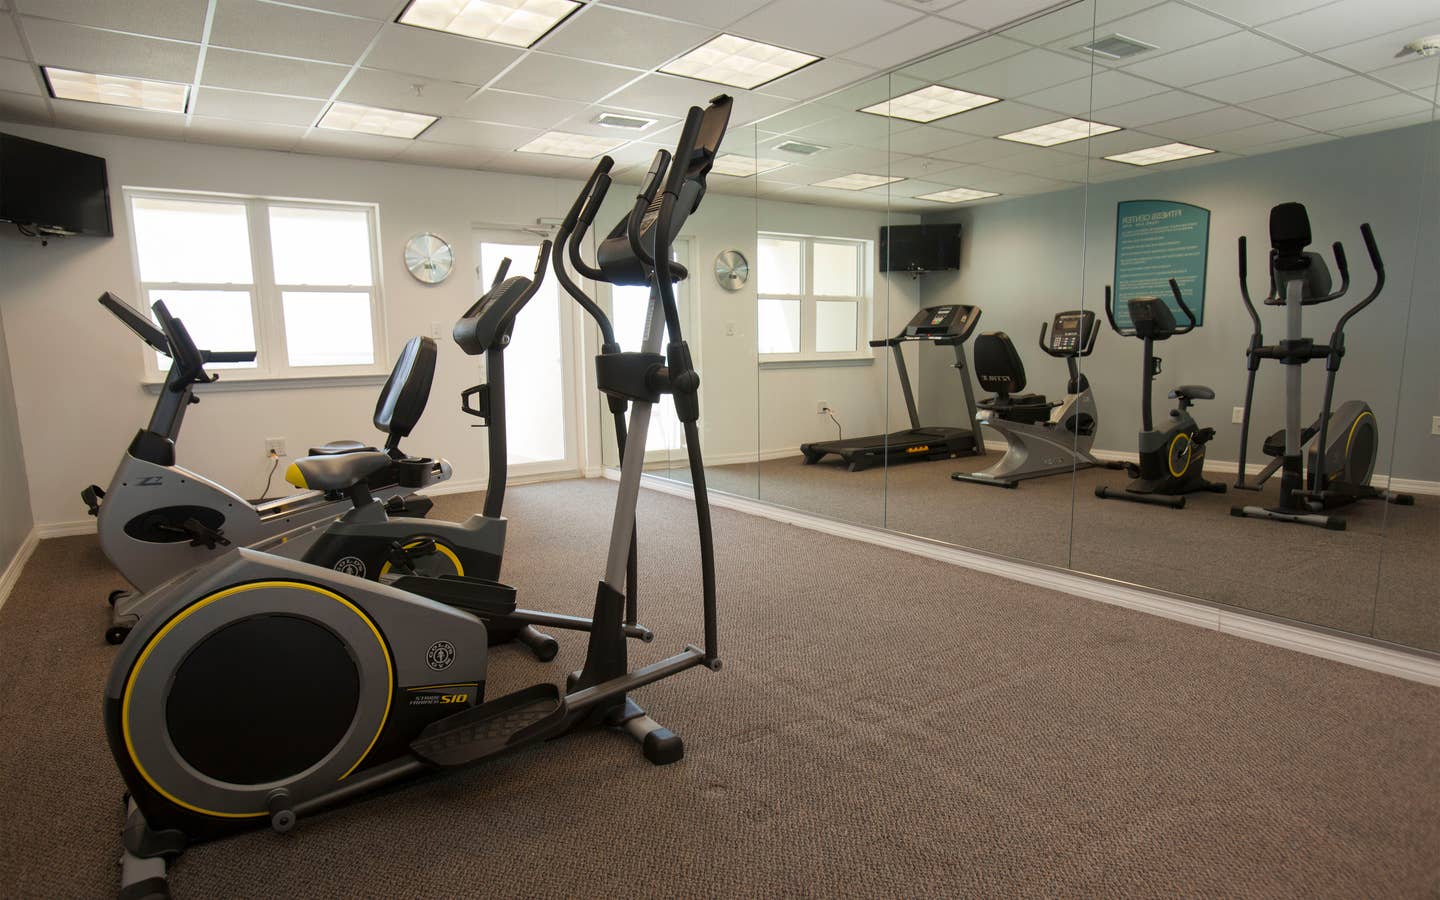 Fitness center with treadmills, stationary bicycles and ellipticals at Panama City Beach Resort in Florida.